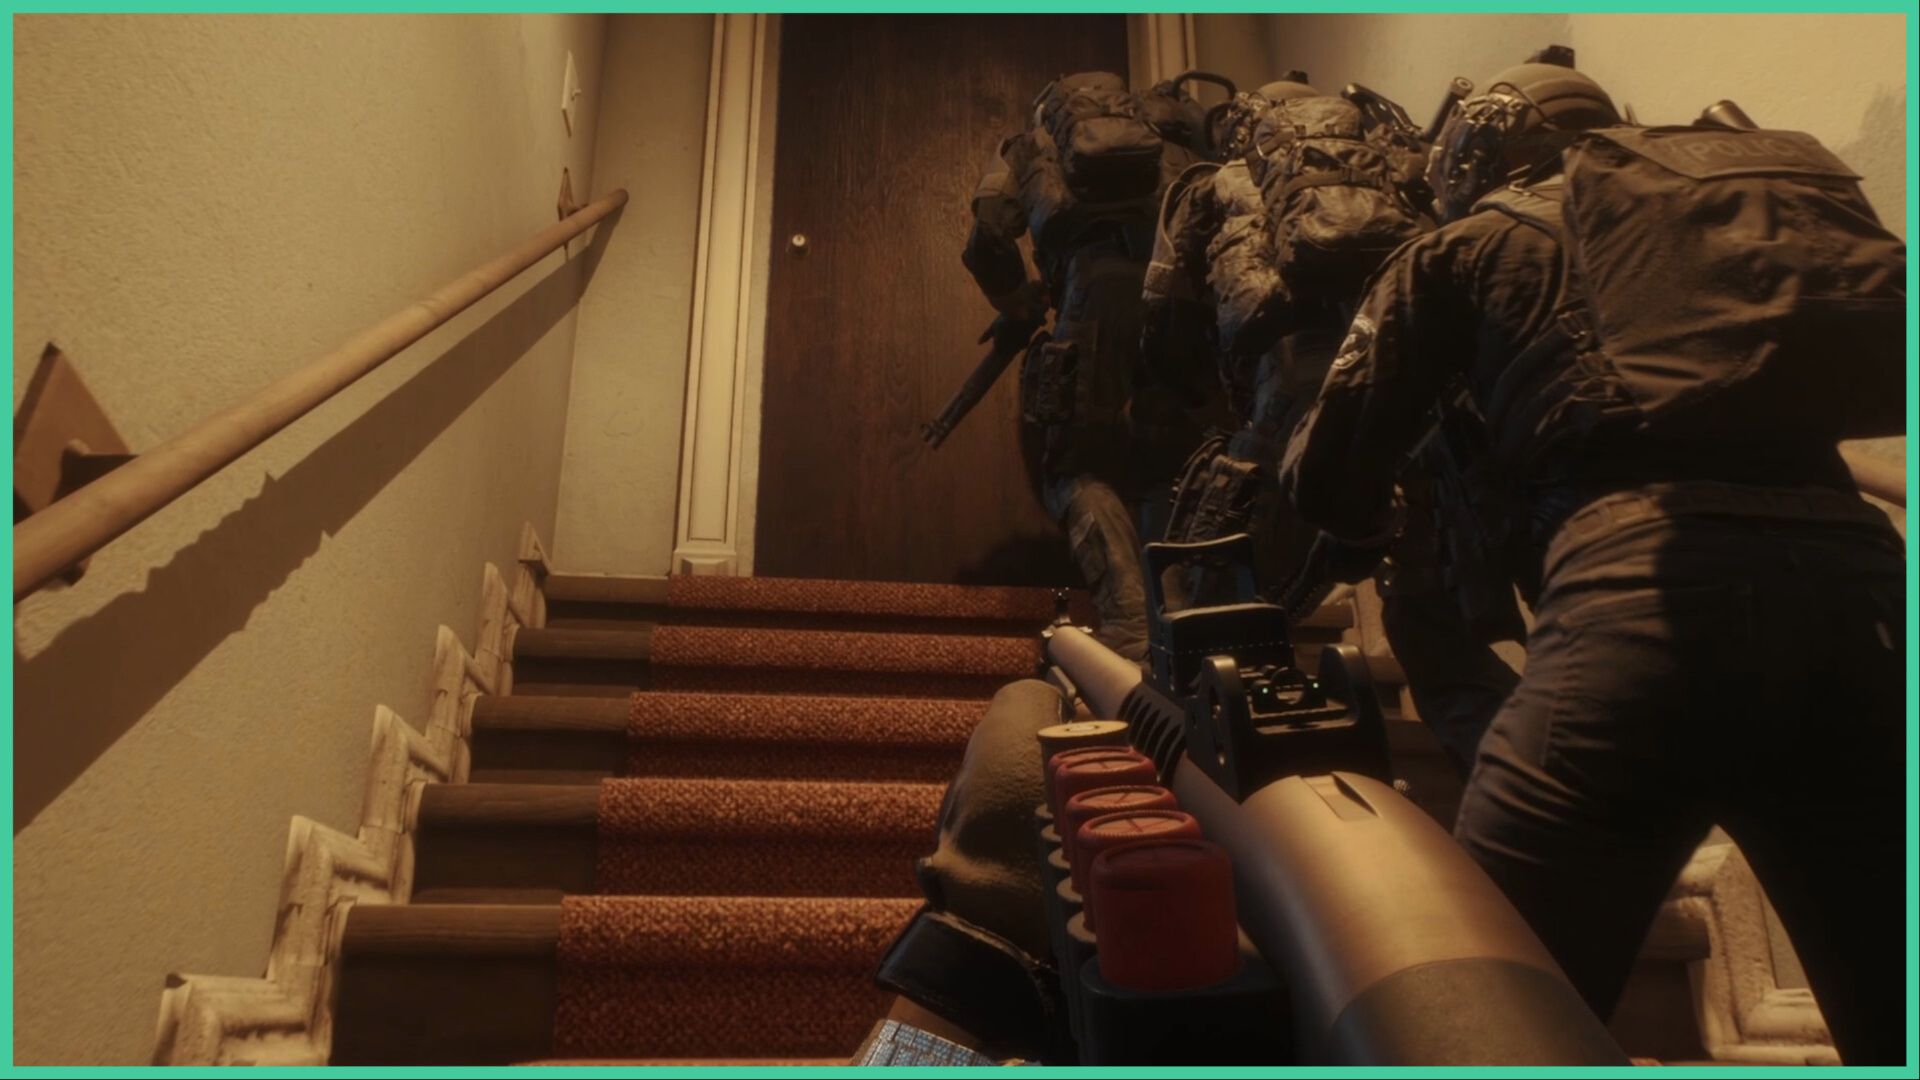 feature image for our ready or not weapon tier list, the image features a promo screenshot from the game of the player and 3 other swat team members standing to the right of a staircase that leads to a closed door, they all have their weapons ready